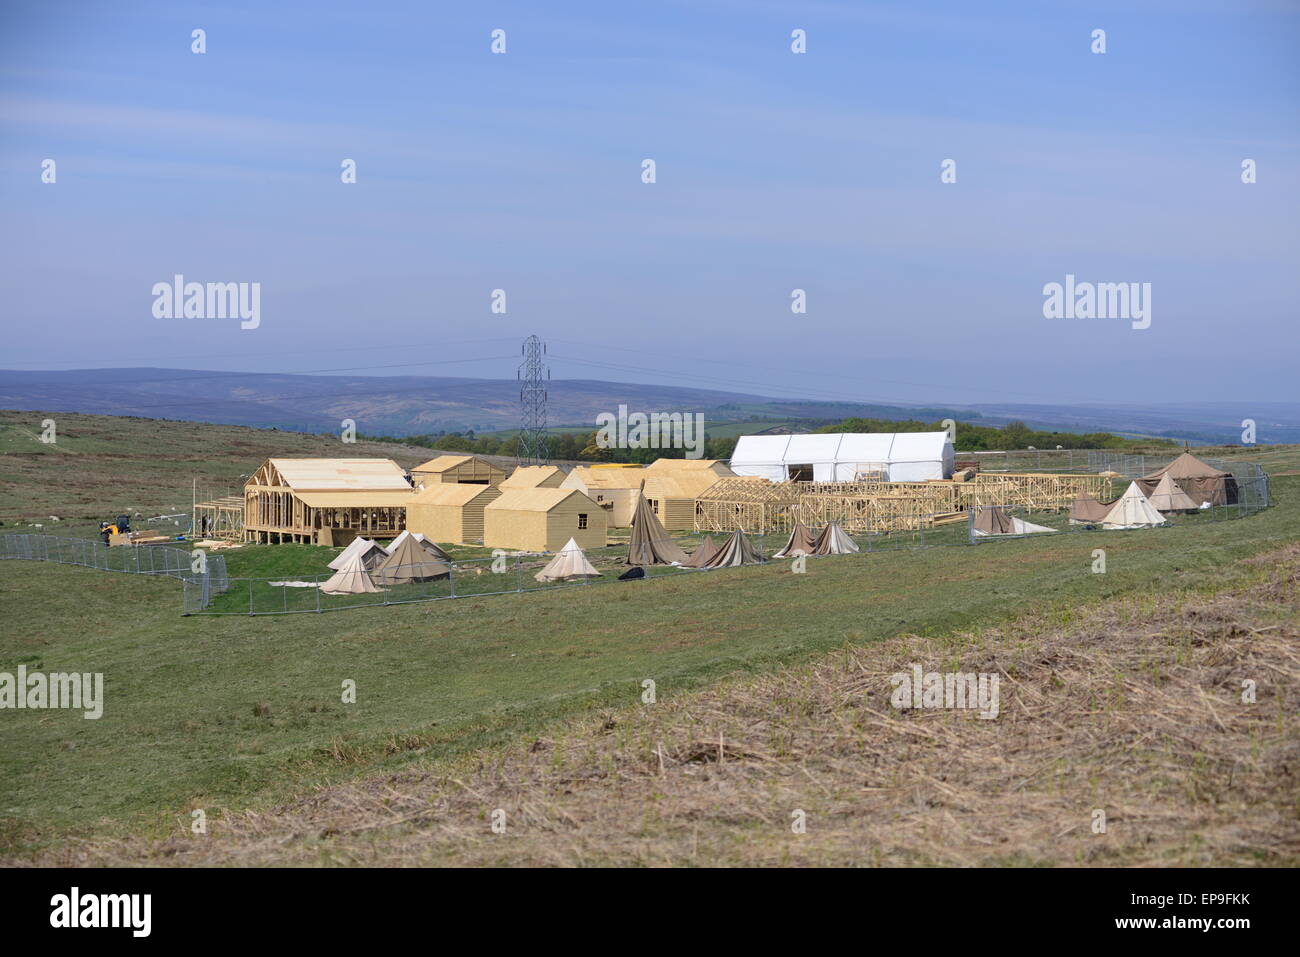 Barnsley, UK. The film set which is currently being built for new ITV drama 'Jericho'. Picture: Scott Bairstow/Alamy Stock Photo